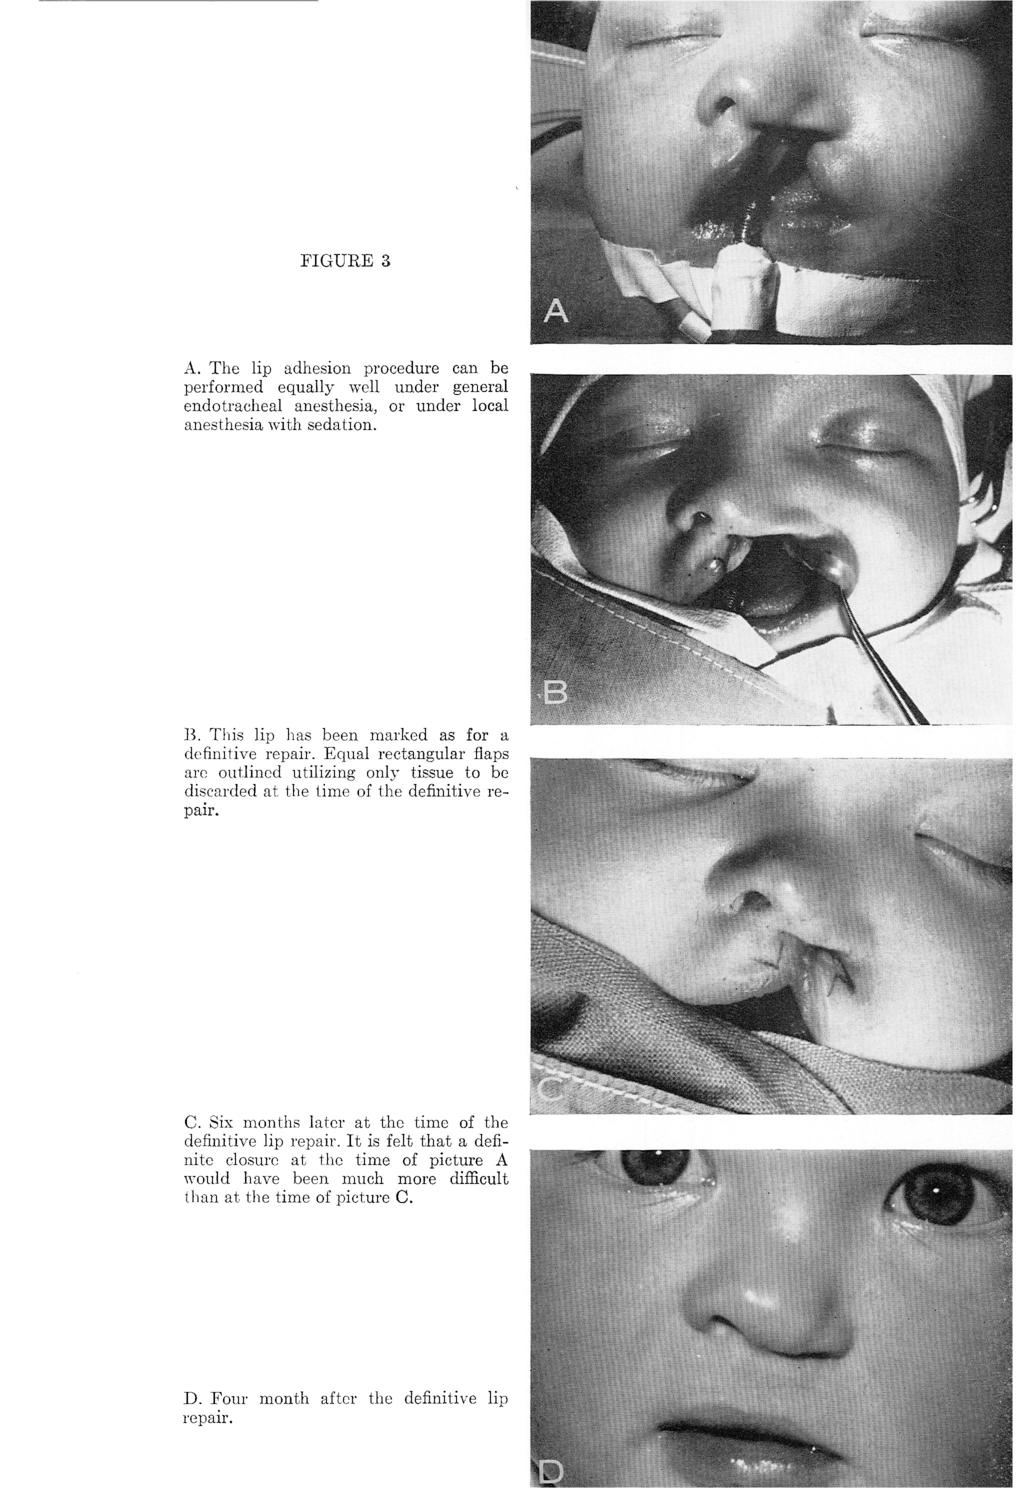 FIGURE 3 A. The lip adhesion procedure can be performed equally well under general endotracheal anesthesia, or under local anesthesia with sedation. B.